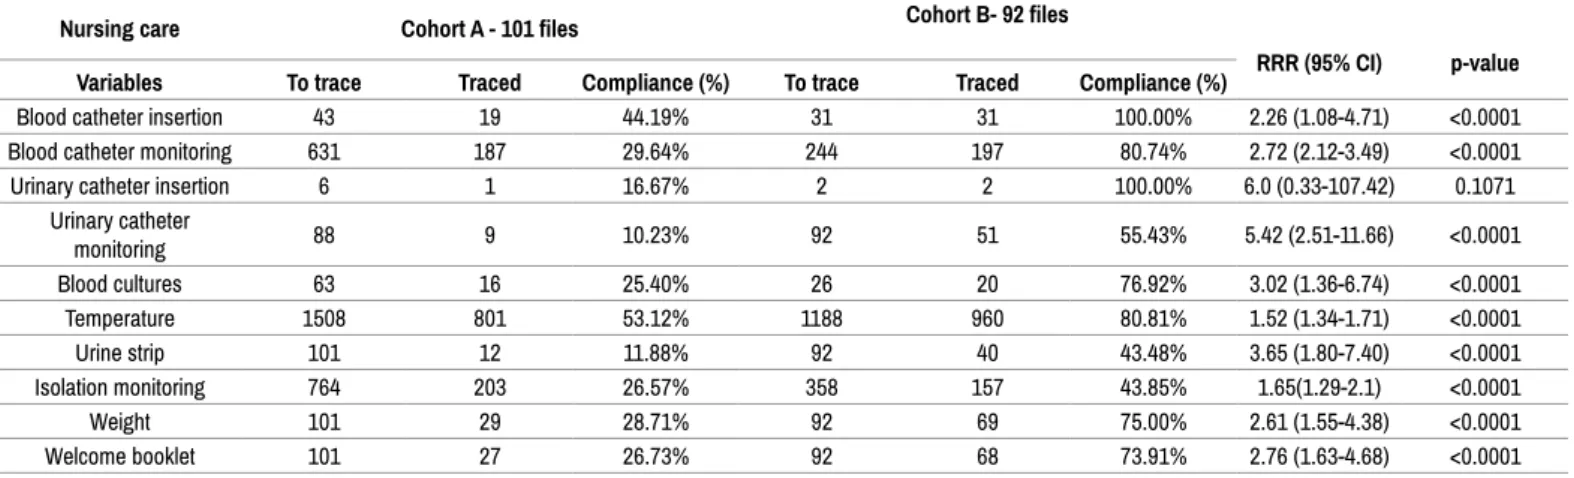 Table 2. Compliance to traceability of 10 variables between any type of record* (Cohort A) and PSR (Cohort B).